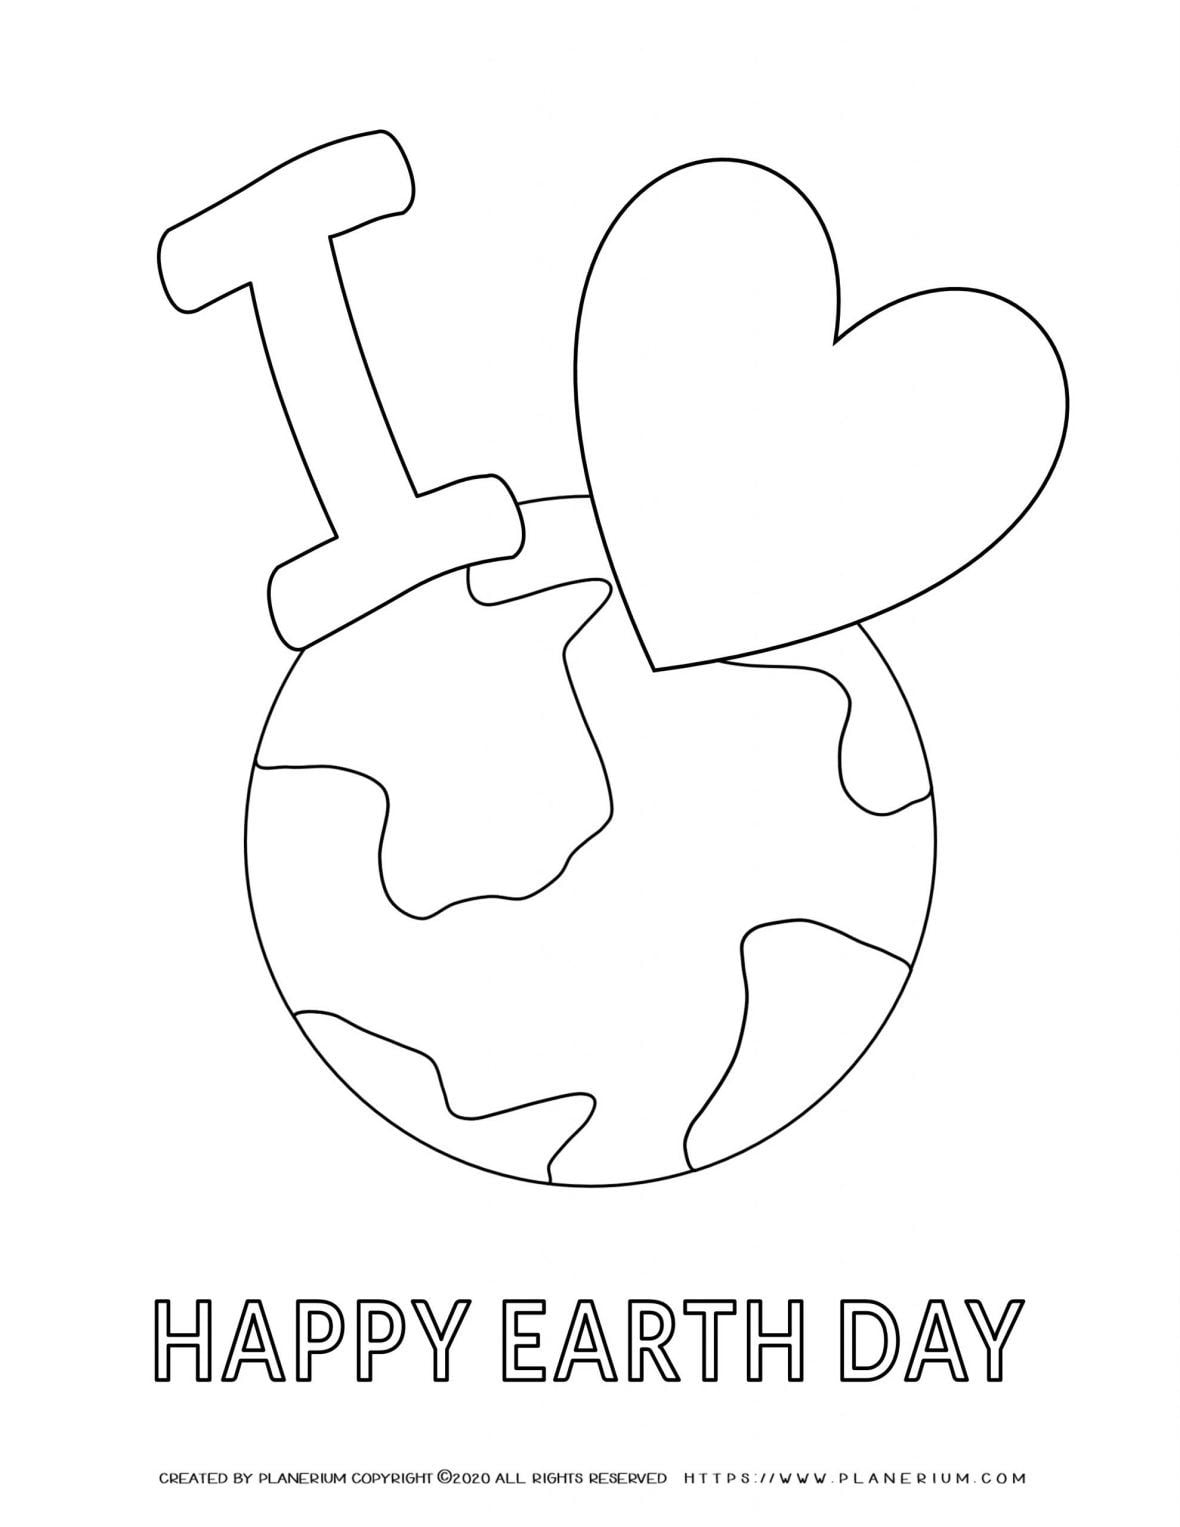 Earth day - Coloring page - I Love Earth